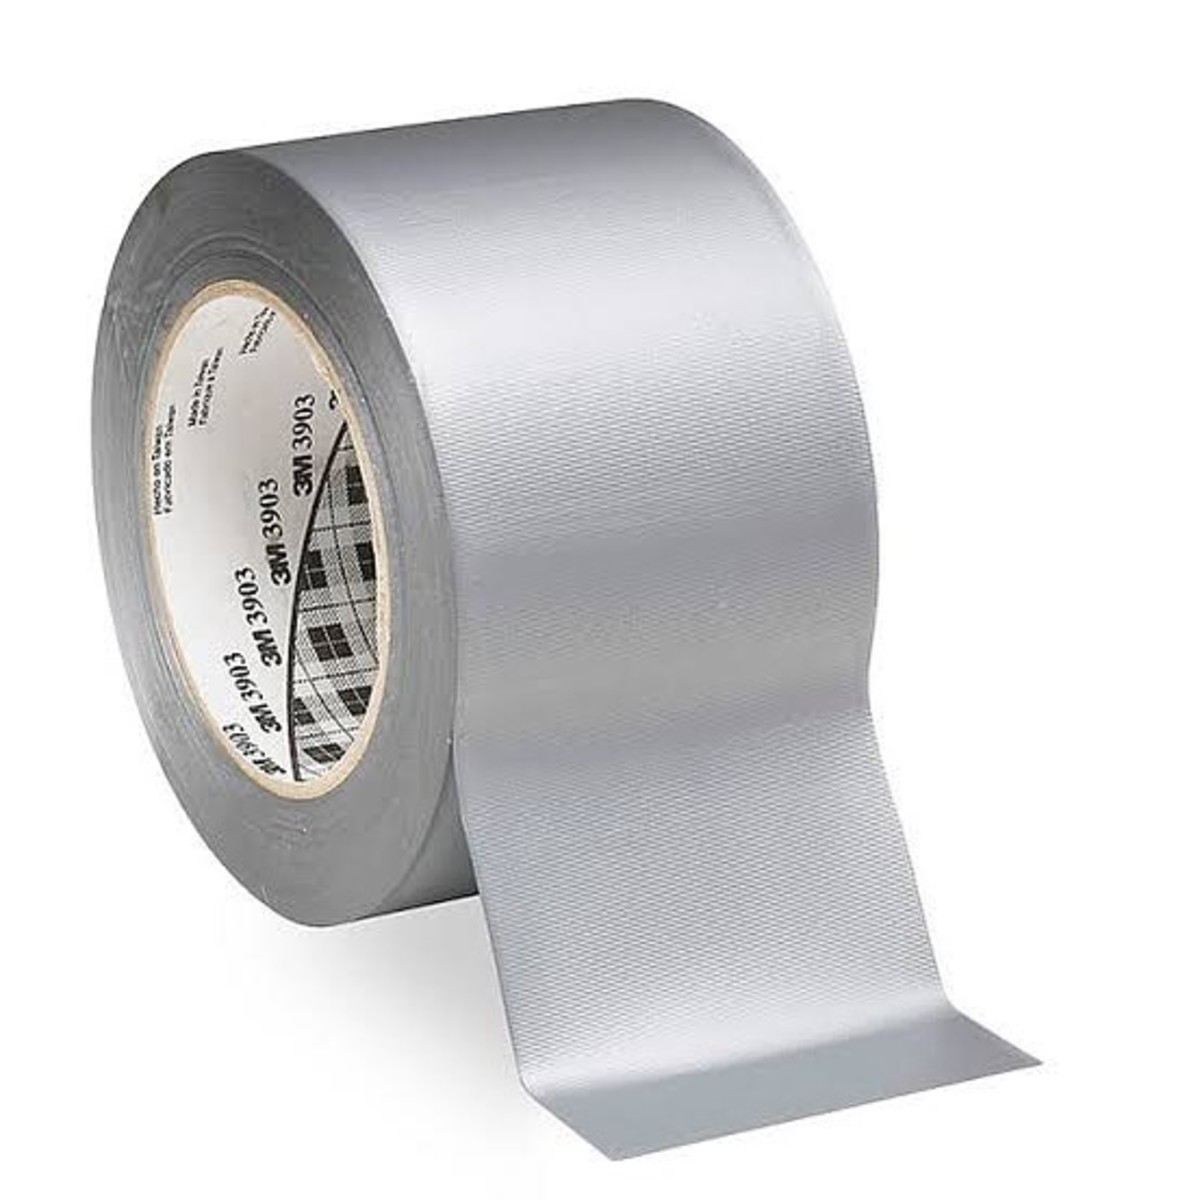 Duct tape.